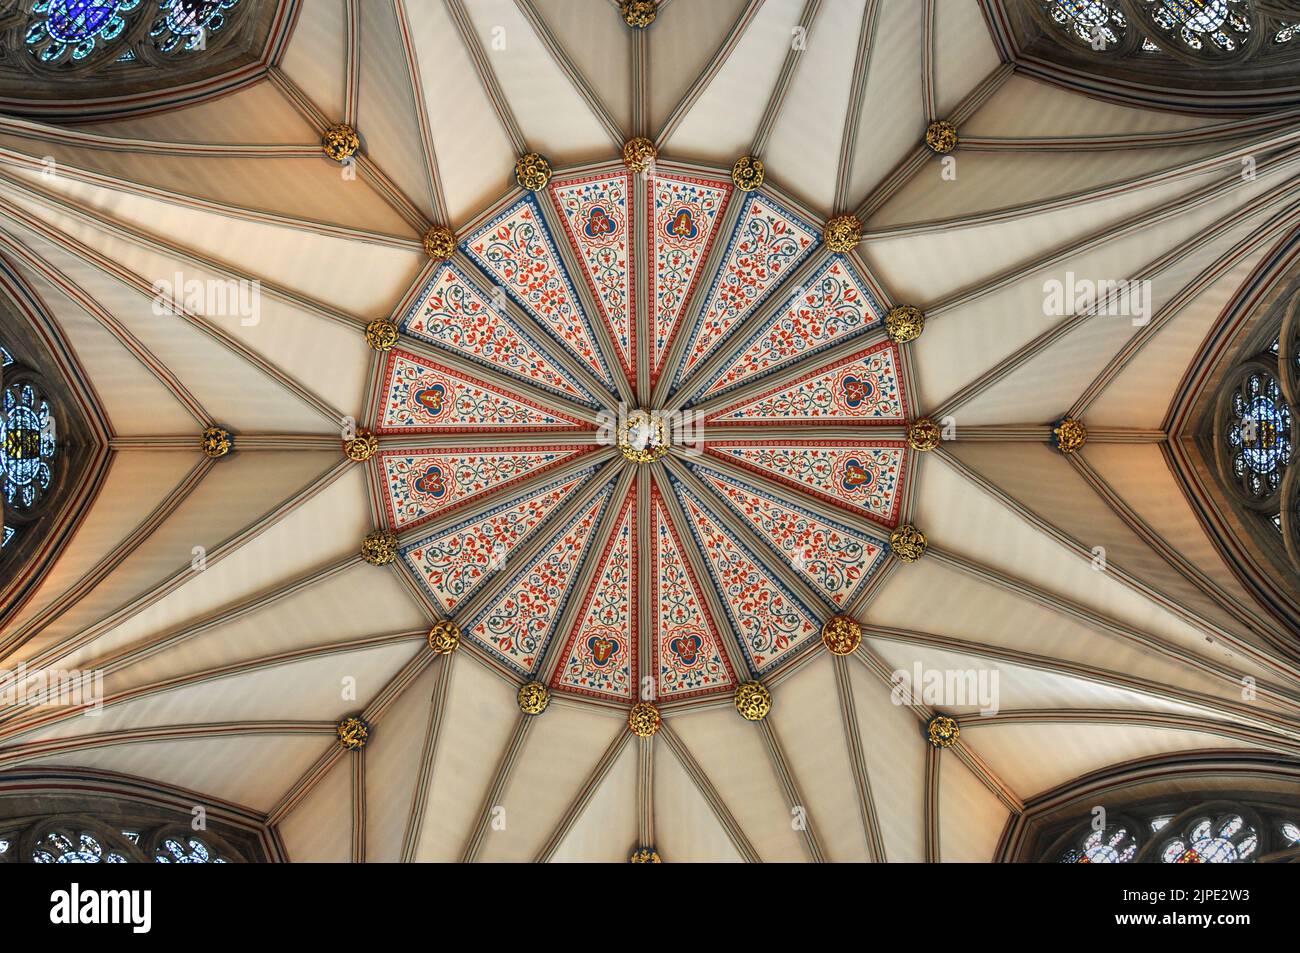 York Minster Chapter House, showing amazing ceiling and stained glass windows Stock Photo